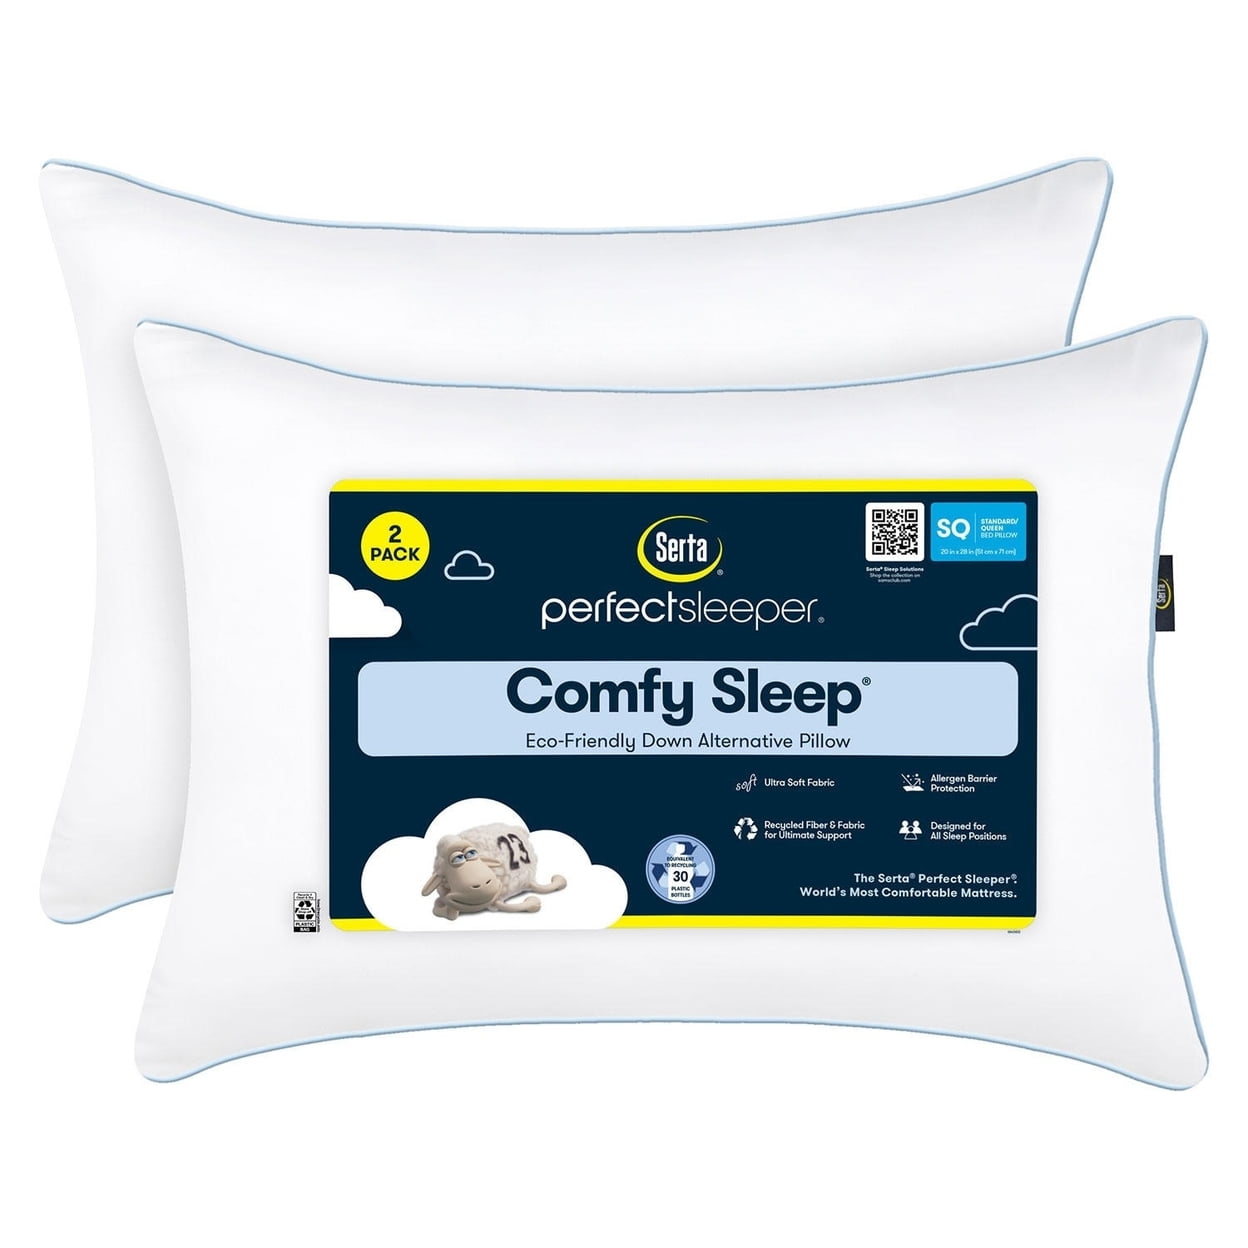 8 pillows for any type of sleeper for a better night's rest in 2022